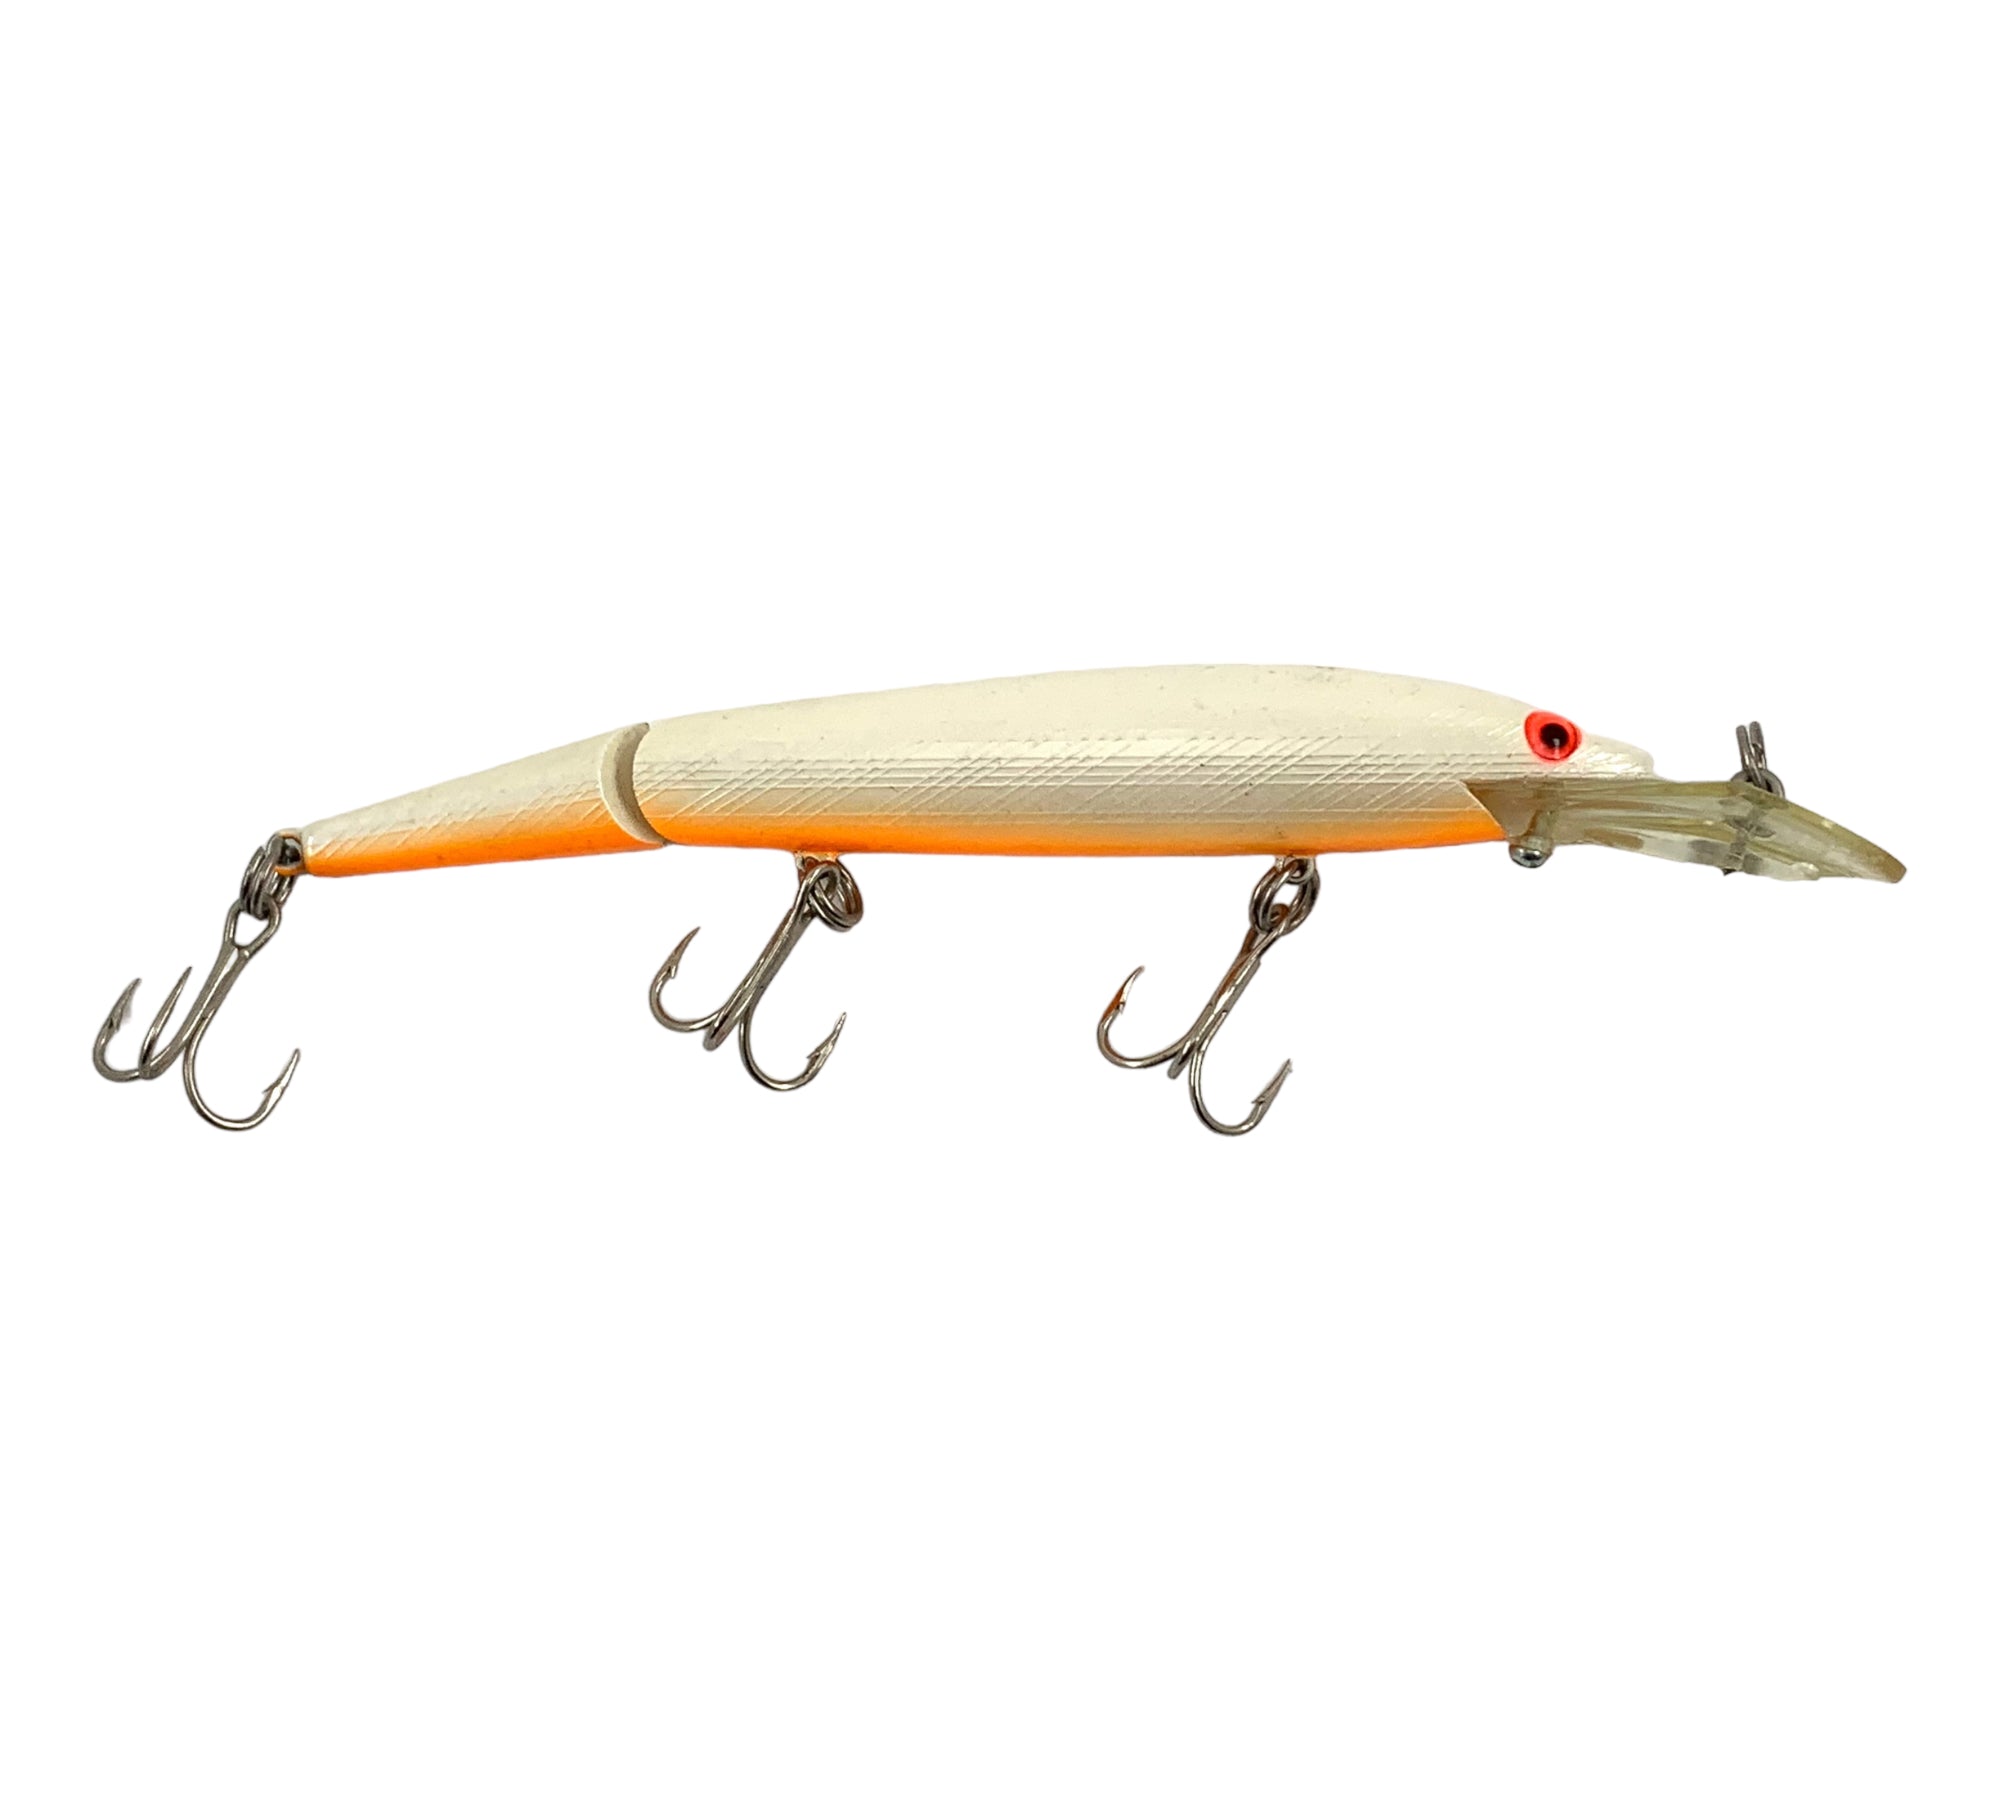 Rebel Lures Jointed Minnow Crankbait Fishing Lure, 1 7/8 In, 3/32 Oz, Rainbow Trout